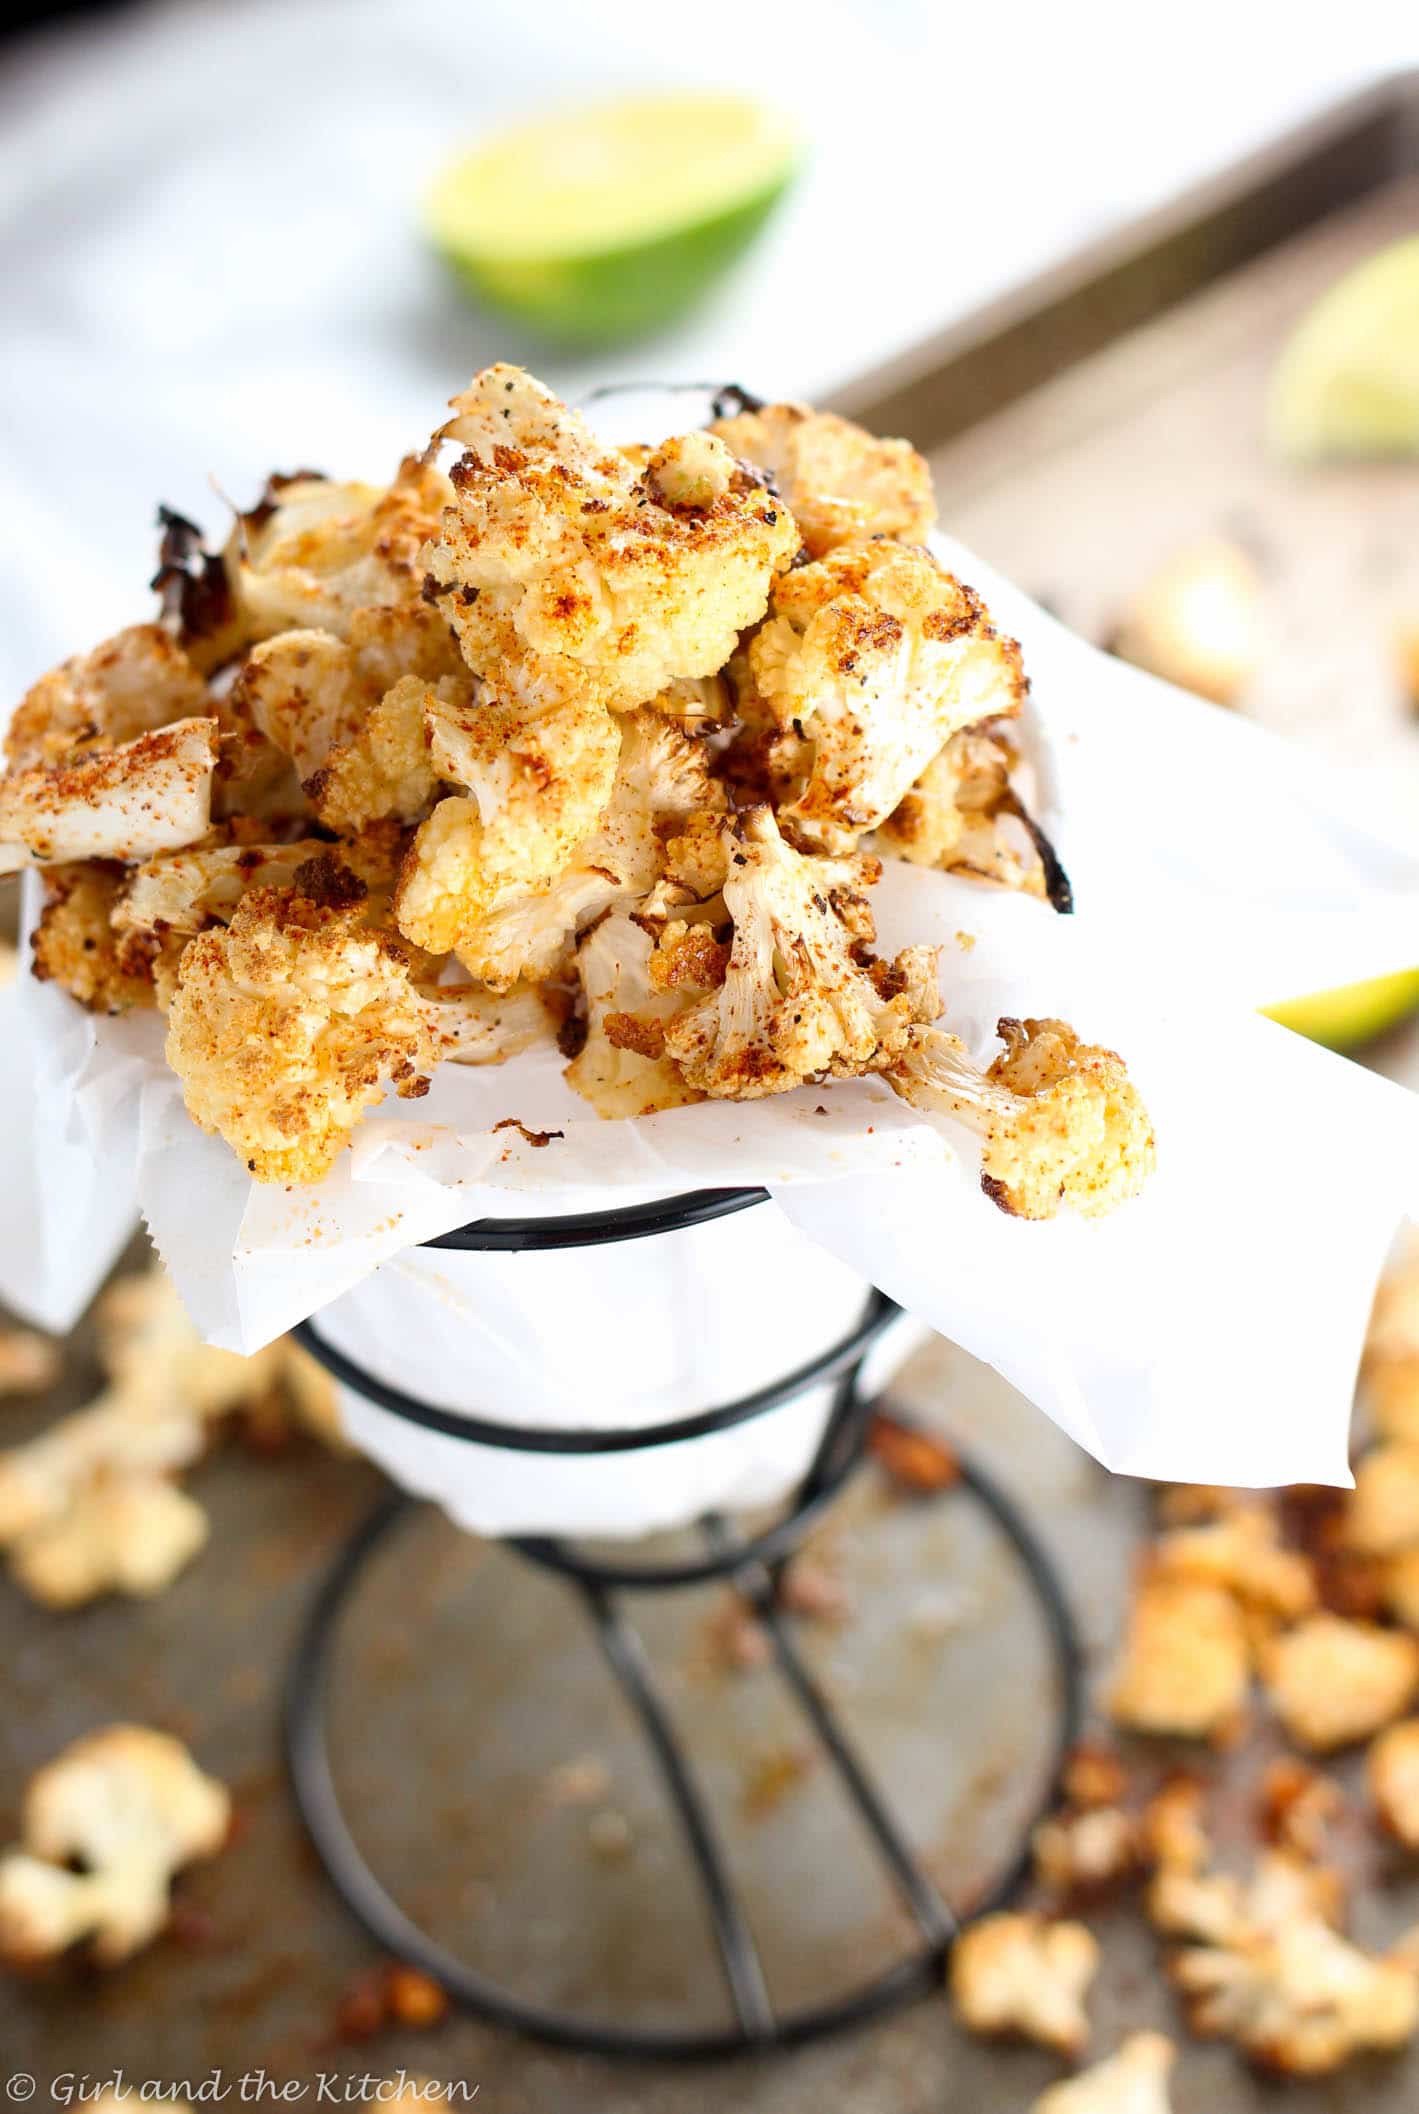 Chipotle-Lime-Oven-Roasted-Cauliflower-Popcorn-3-of-7